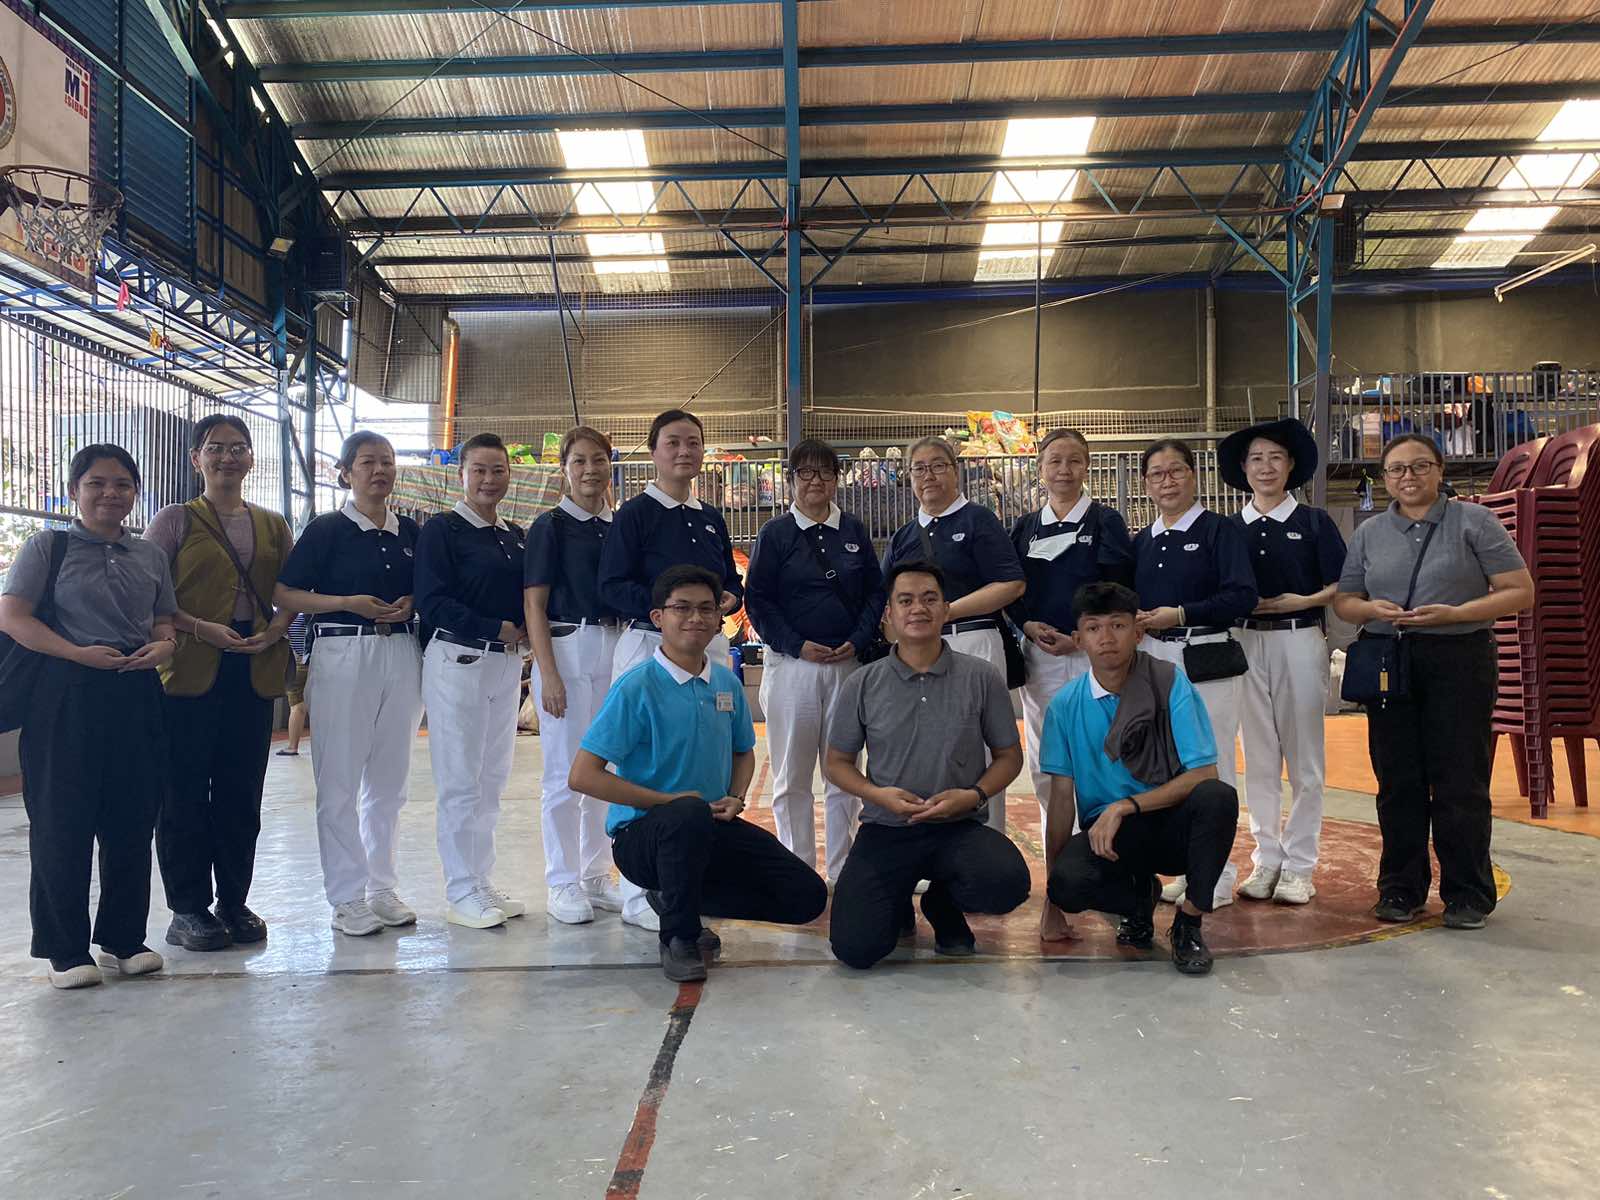 In his first time to participate in a relief distribution, Tzu Chi scholar Orvie Prepole (squatting, first from left) was happy to help ease the sadness and hardships of fire victims. “Especially during Tzu Chi prayers,” he says. “I could see that they were moved to tears. If that happened to me, I wouldn’t know what to do.” 